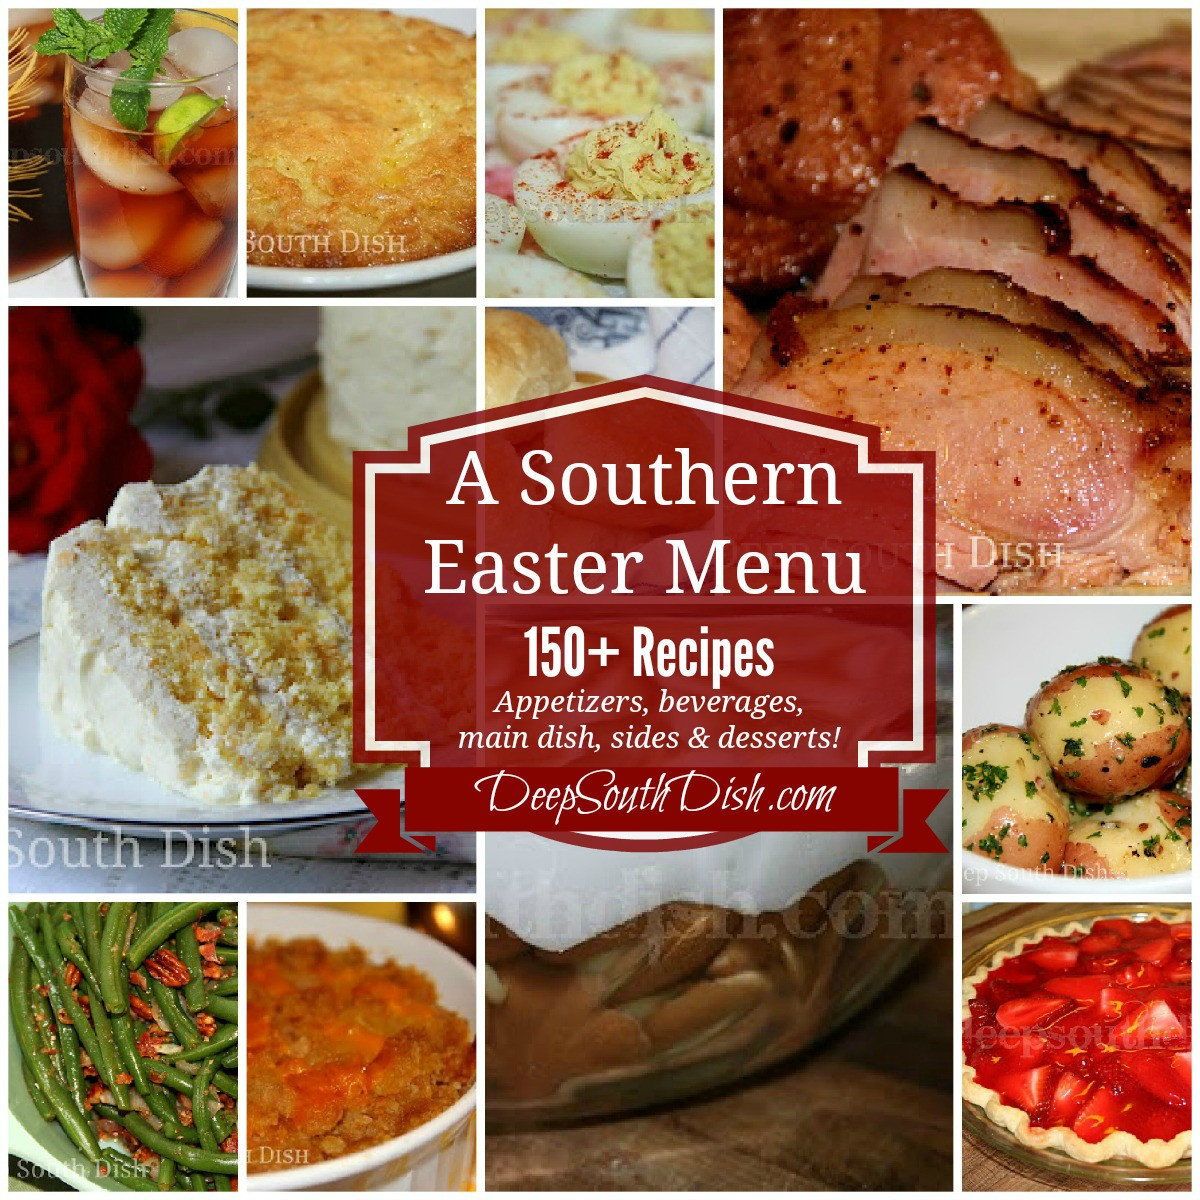 Easter Dinner Menus And Recipes
 Deep South Dish Southern Easter Menu Ideas and Recipes